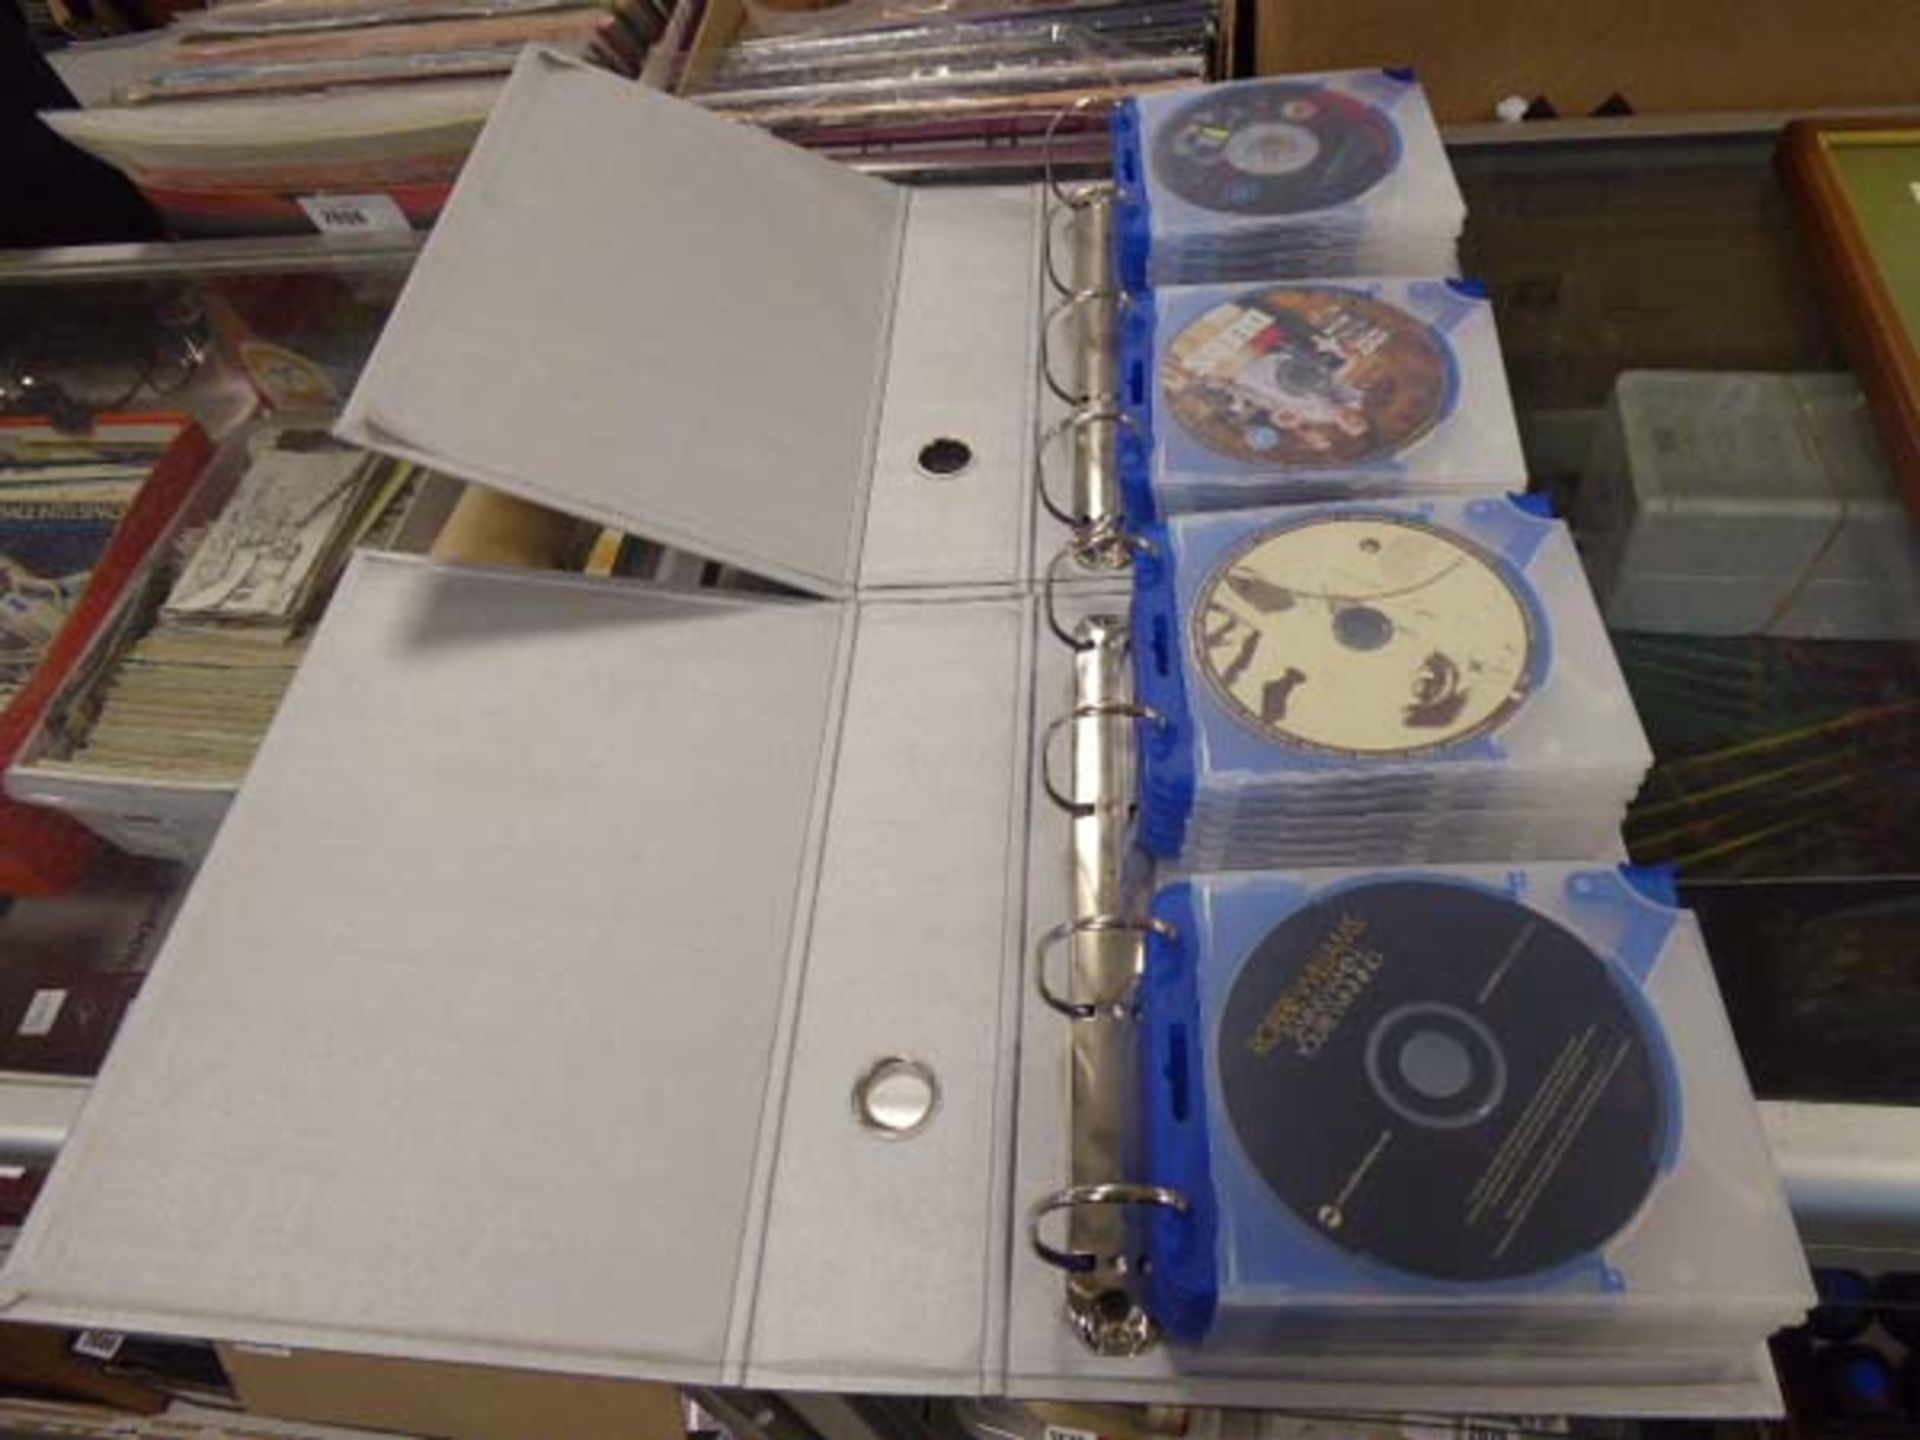 2 binders containing selection of movies and CD music